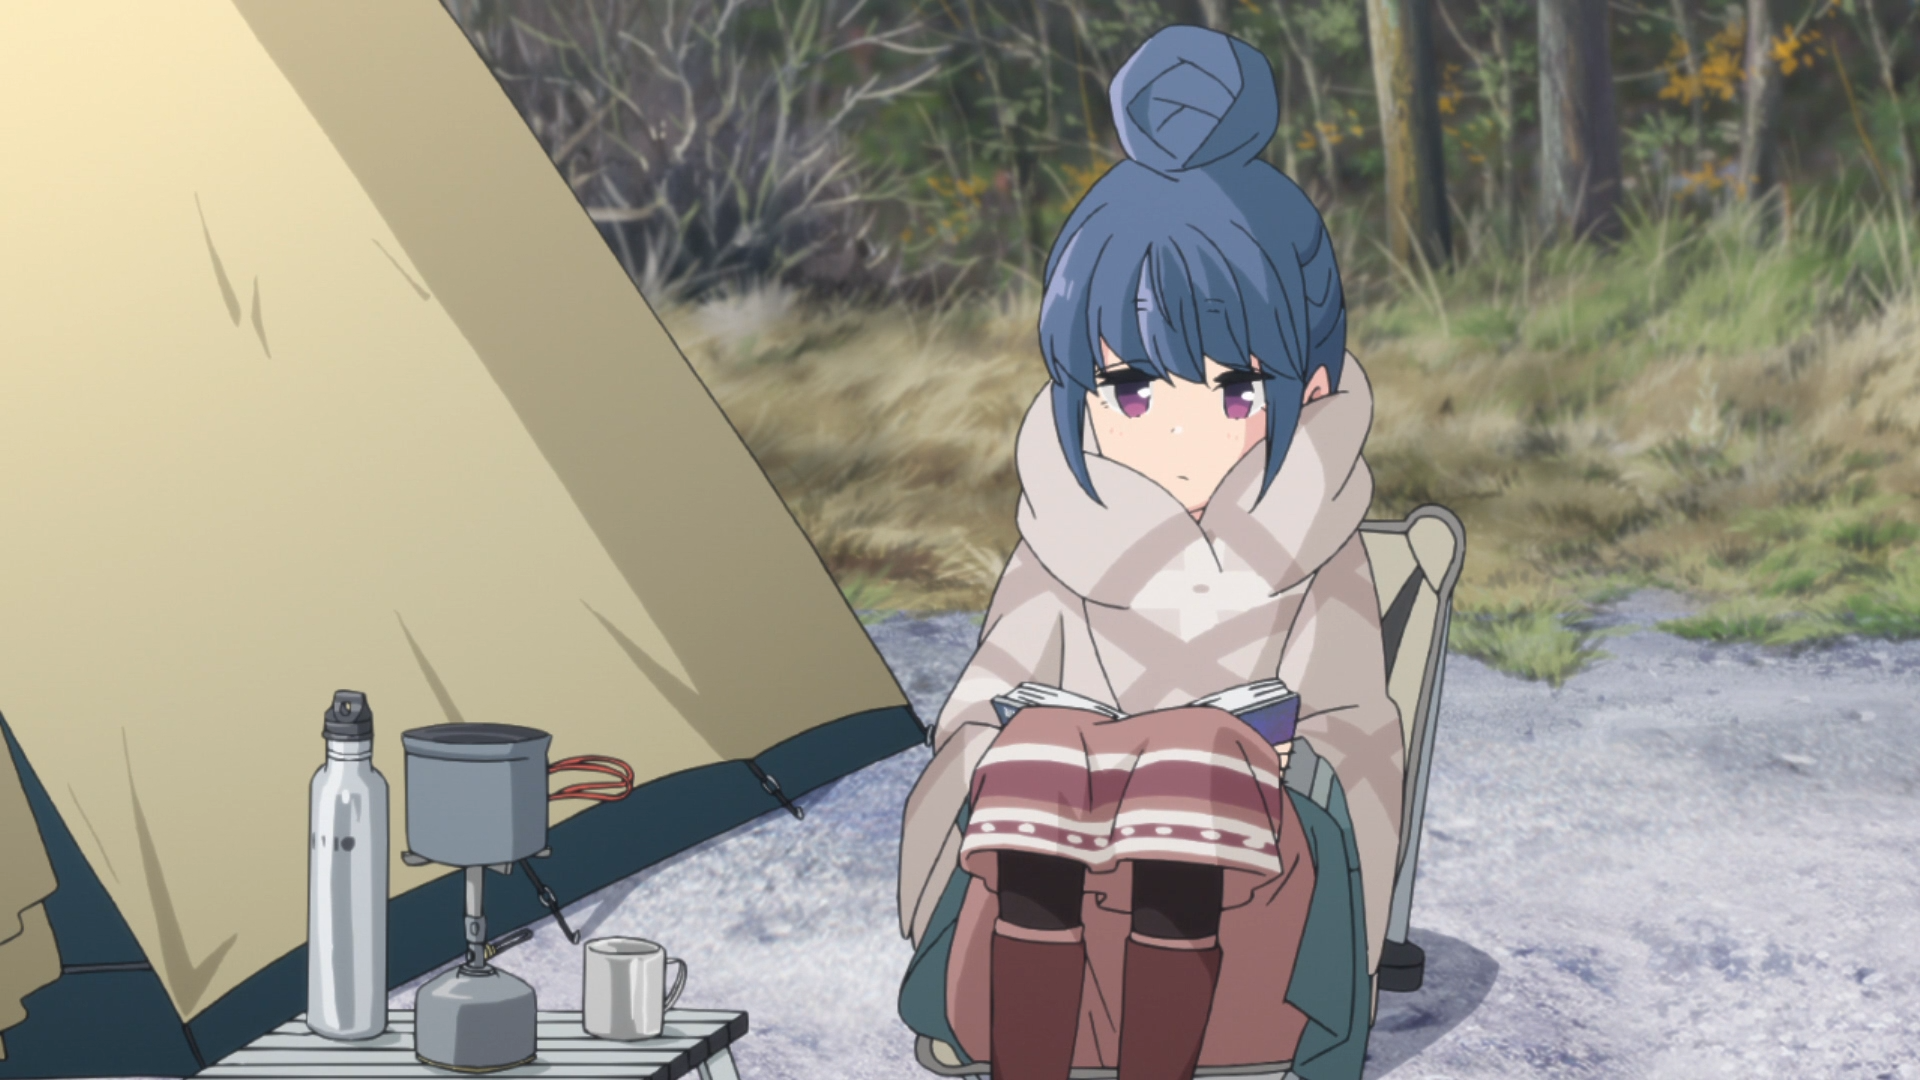 Rin Shima curls up with a book and a pocket heating pack while relaxing in her portable chair at her campsite in a scene from the Laid-Back Camp TV anime.